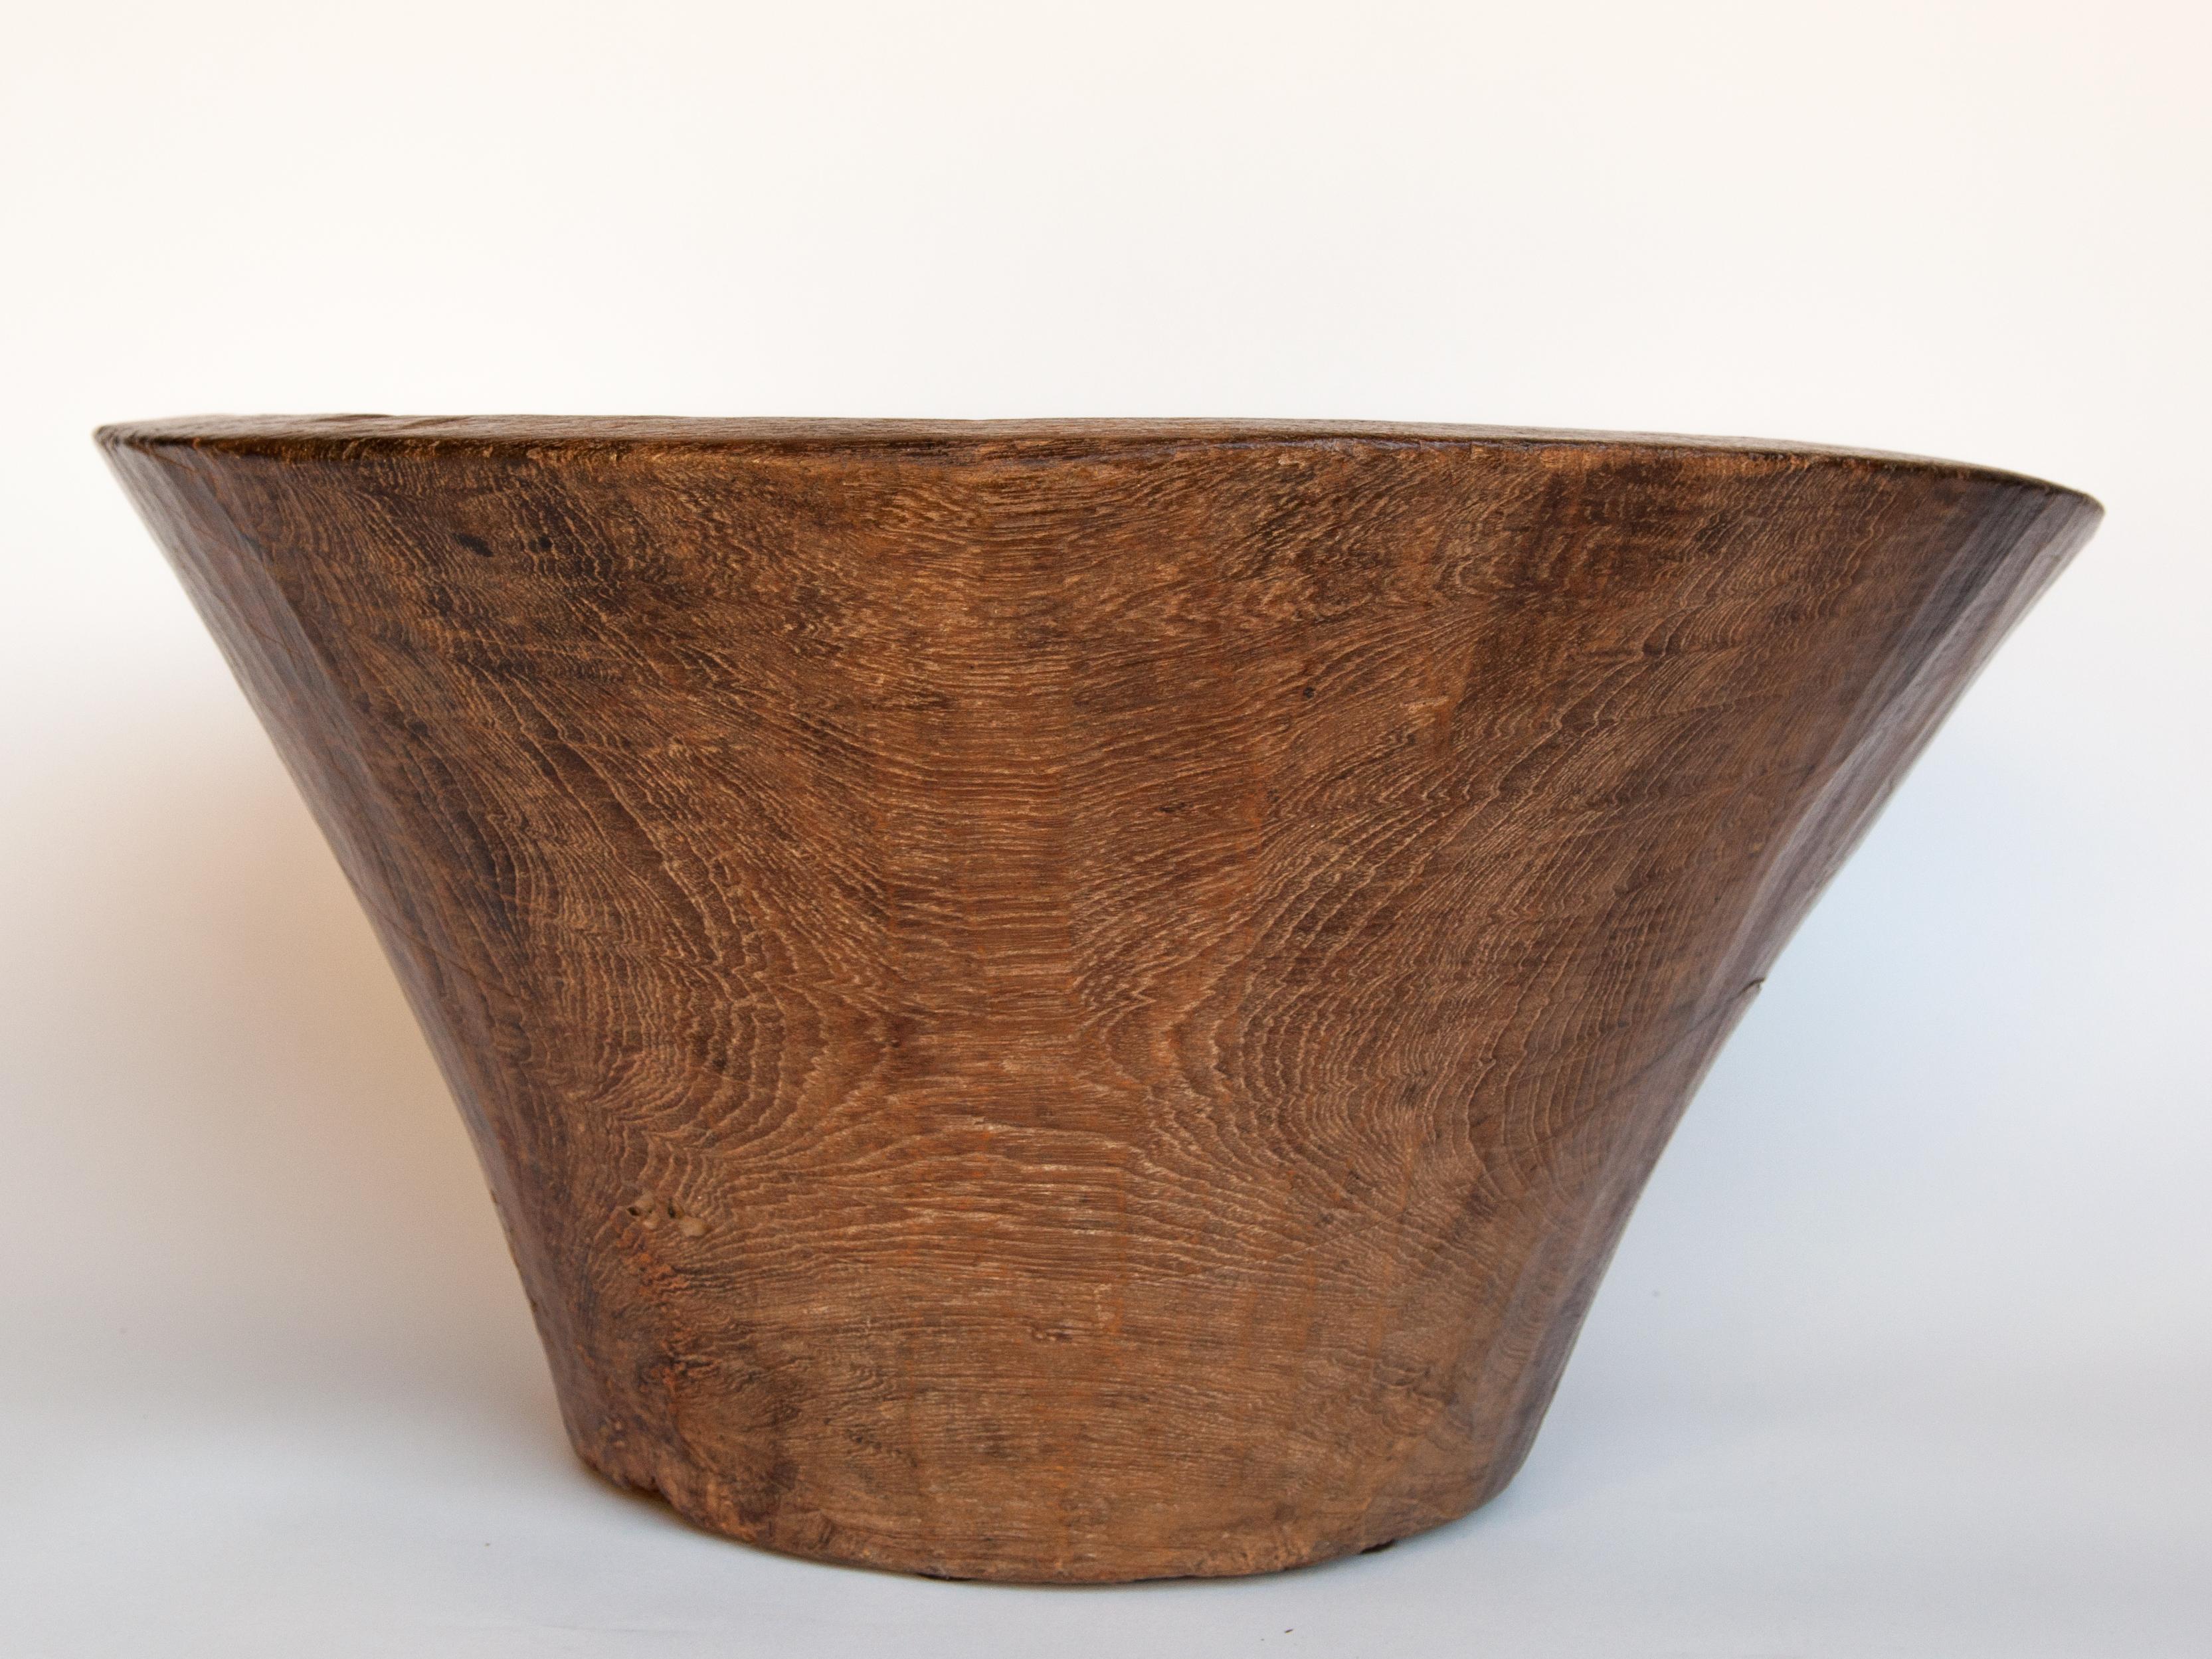 Hand-Crafted Large Vintage Teak Bowl, Hand Hewn, from Cirebon, North Java, Mid-20th Century